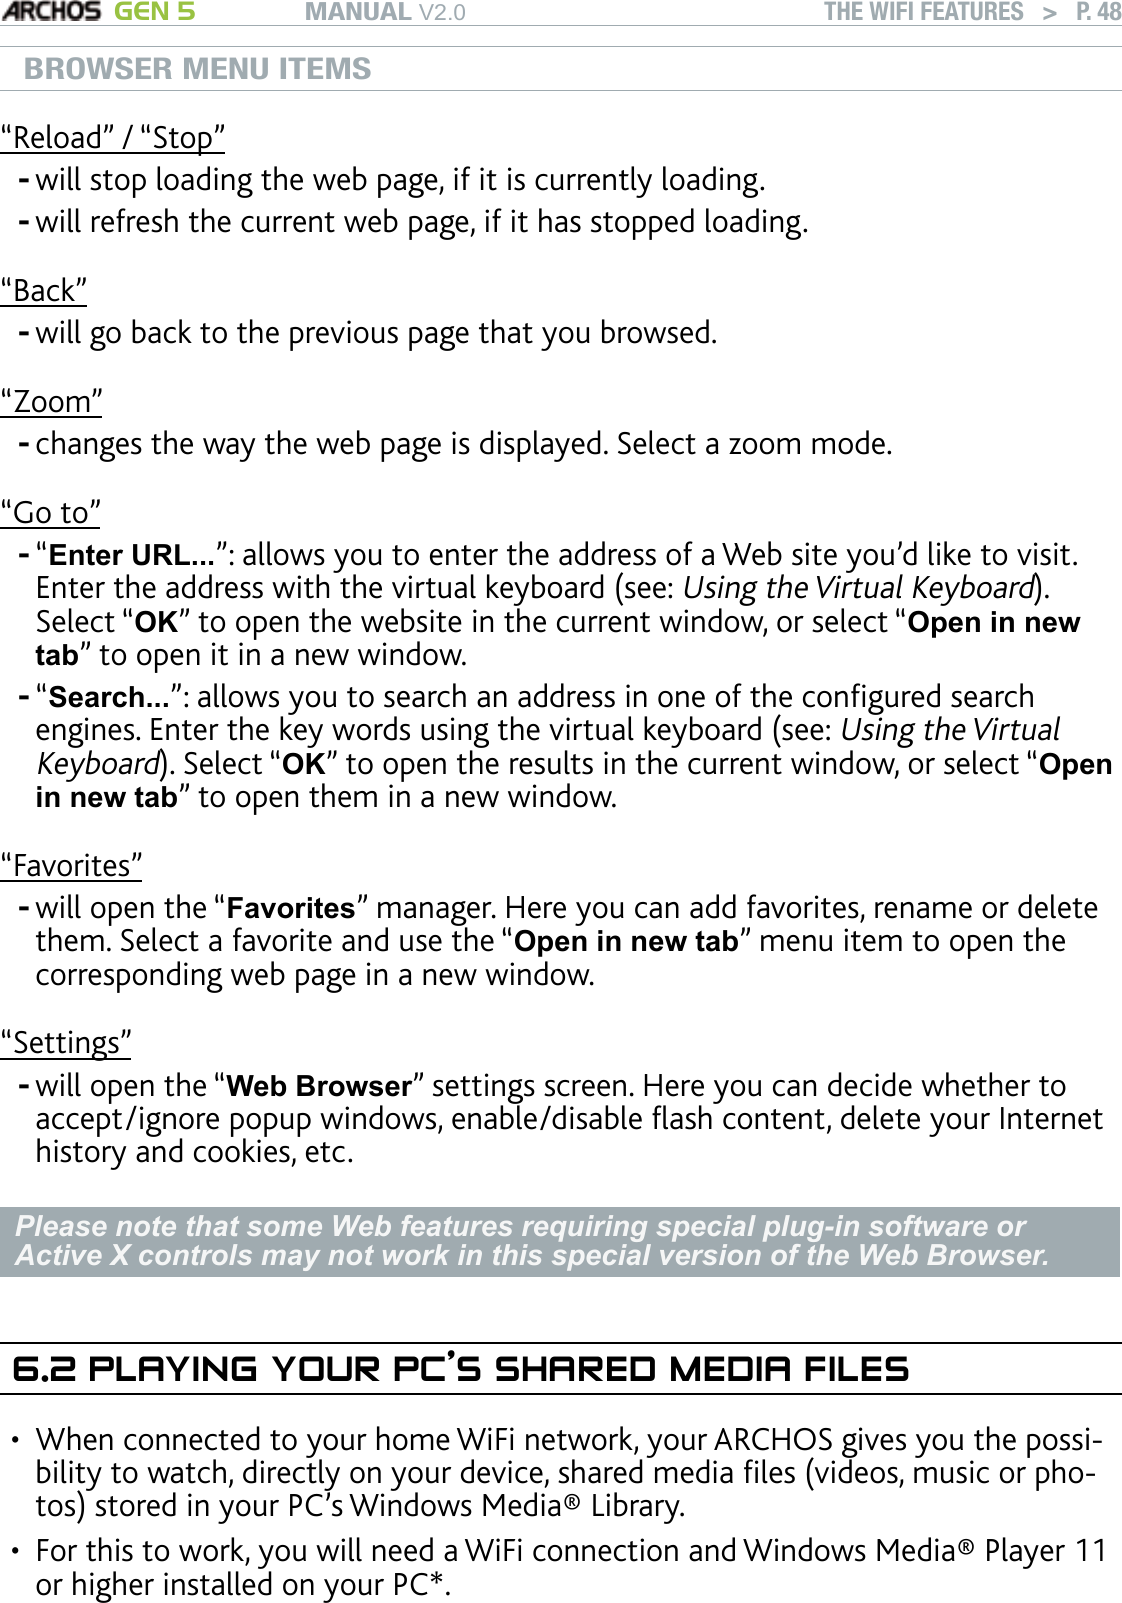 MANUAL V2.0 GEN 5 THE WIFI FEATURES   &gt;   P. 48BROWSER MENU ITEMS“Reload” / “Stop”will stop loading the web page, if it is currently loading.will refresh the current web page, if it has stopped loading.“Back”will go back to the previous page that you browsed.“Zoom”changes the way the web page is displayed. Select a zoom mode.“Go to”“Enter URL...”: allows you to enter the address of a Web site you’d like to visit. Enter the address with the virtual keyboard (see: Using the Virtual Keyboard). Select “OK” to open the website in the current window, or select “Open in new tab” to open it in a new window.“Search...”: allows you to search an address in one of the congured search engines. Enter the key words using the virtual keyboard (see: Using the Virtual Keyboard). Select “OK” to open the results in the current window, or select “Open in new tab” to open them in a new window.“Favorites”will open the “Favorites” manager. Here you can add favorites, rename or delete them. Select a favorite and use the “Open in new tab” menu item to open the corresponding web page in a new window.“Settings”will open the “Web Browser” settings screen. Here you can decide whether to accept/ignore popup windows, enable/disable ash content, delete your Internet history and cookies, etc.Please note that some Web features requiring special plug-in software or Active X controls may not work in this special version of the Web Browser.6.2 PLAYING YOUR PC’S SHARED MEDIA FILESWhen connected to your home WiFi network, your ARCHOS gives you the possi-bility to watch, directly on your device, shared media les (videos, music or pho-tos) stored in your PC’s Windows Media® Library. For this to work, you will need a WiFi connection and Windows Media® Player 11 or higher installed on your PC*. --------••